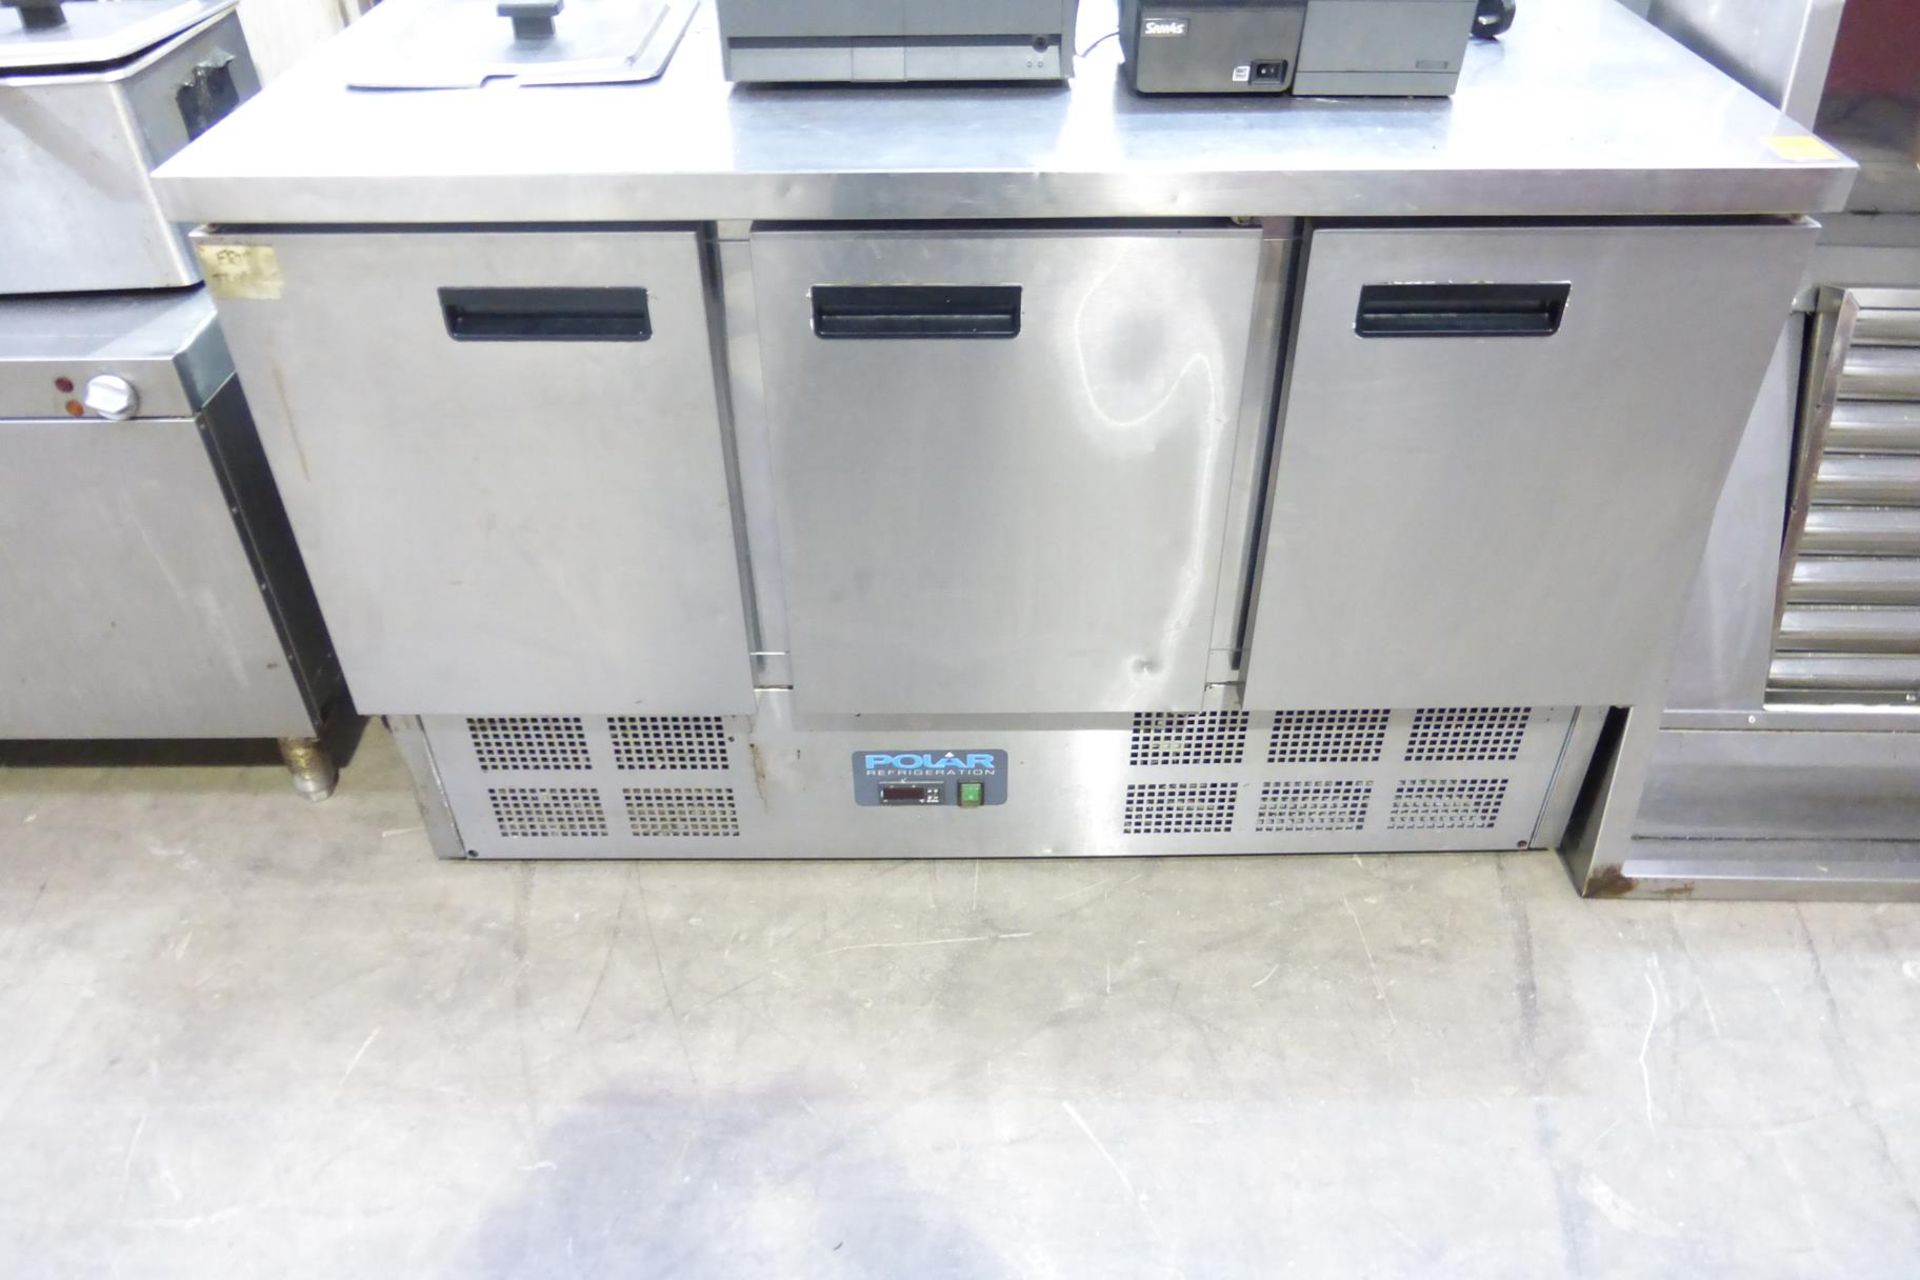 * A Polar Refrigeration Triple Stainless Steel Fridge Unit. Please note there is a £10 Lift out